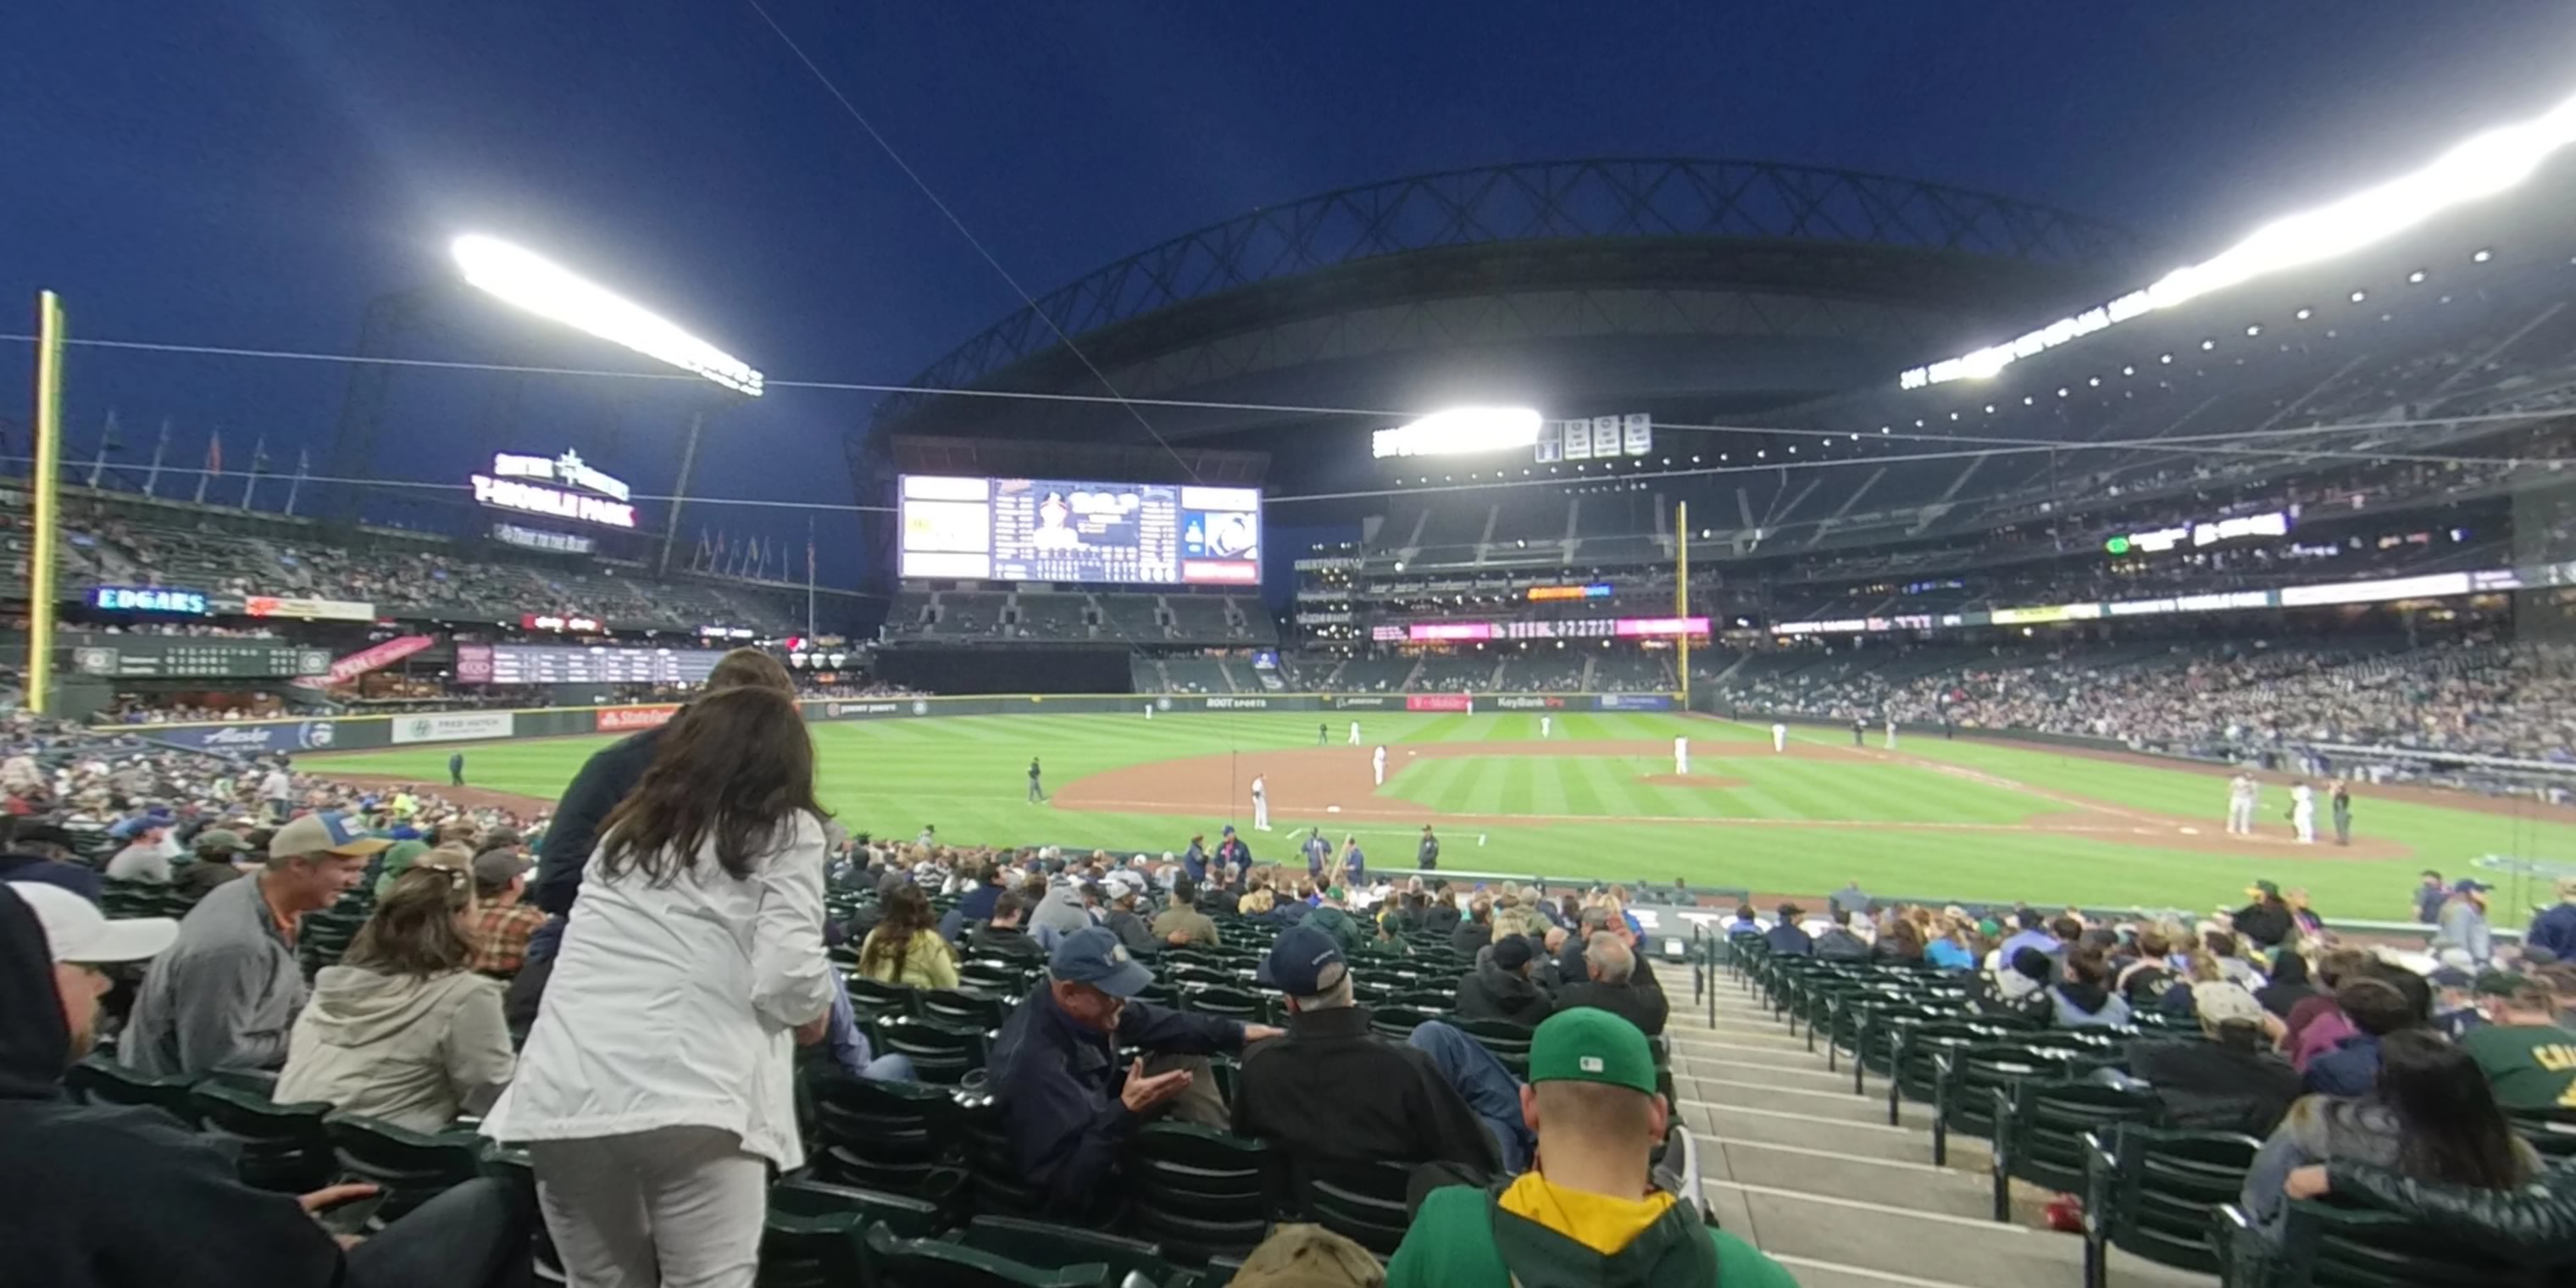 section 137 panoramic seat view  for baseball - t-mobile park